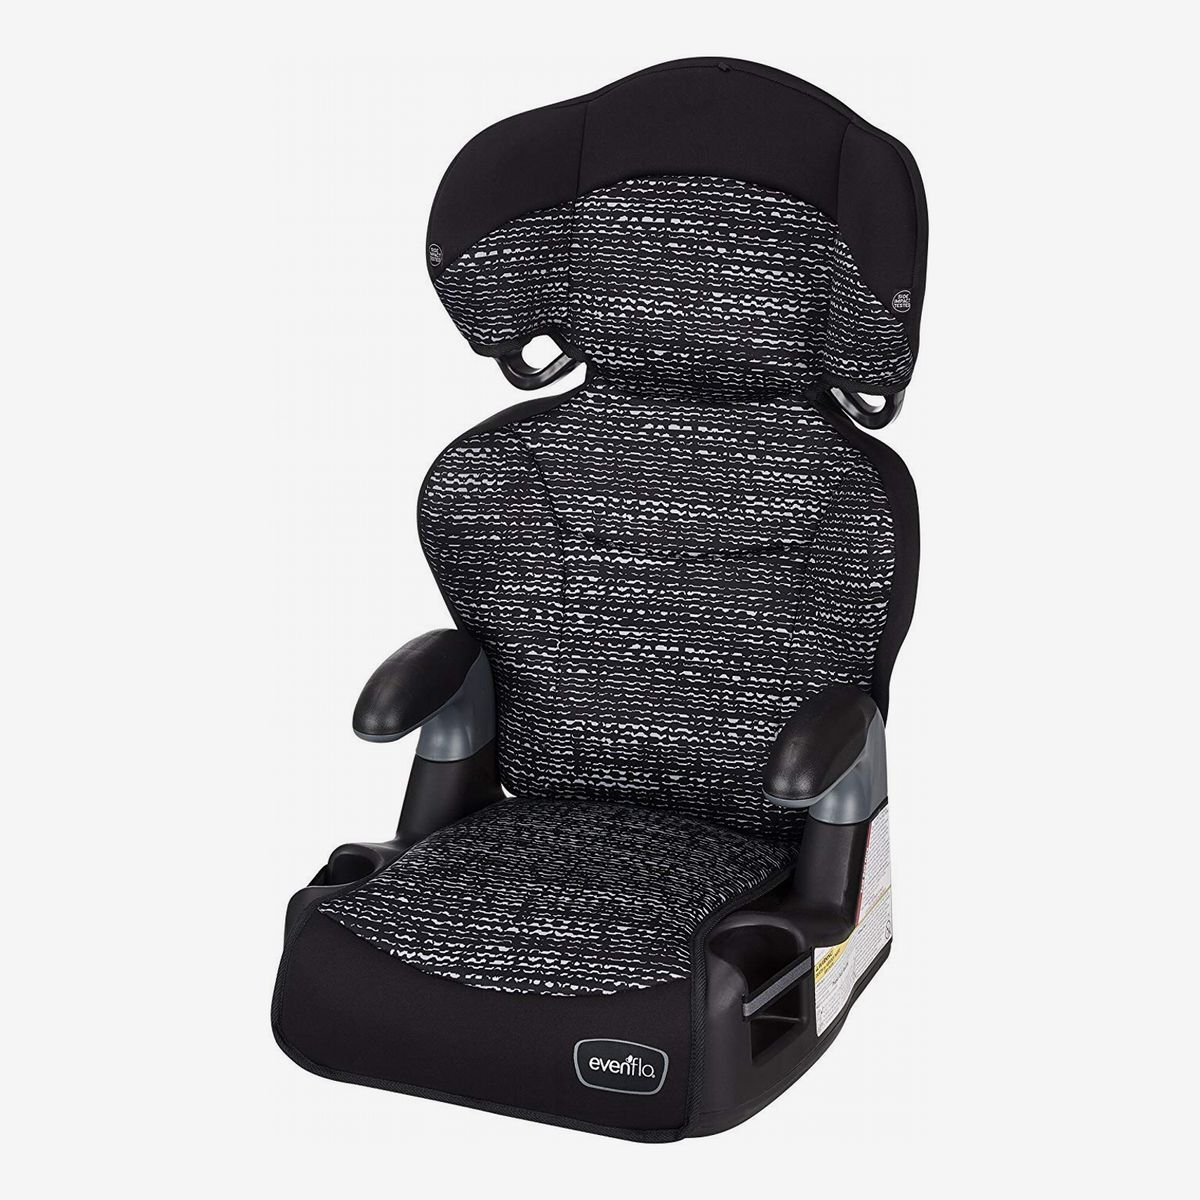 best car seat for 25 pound baby